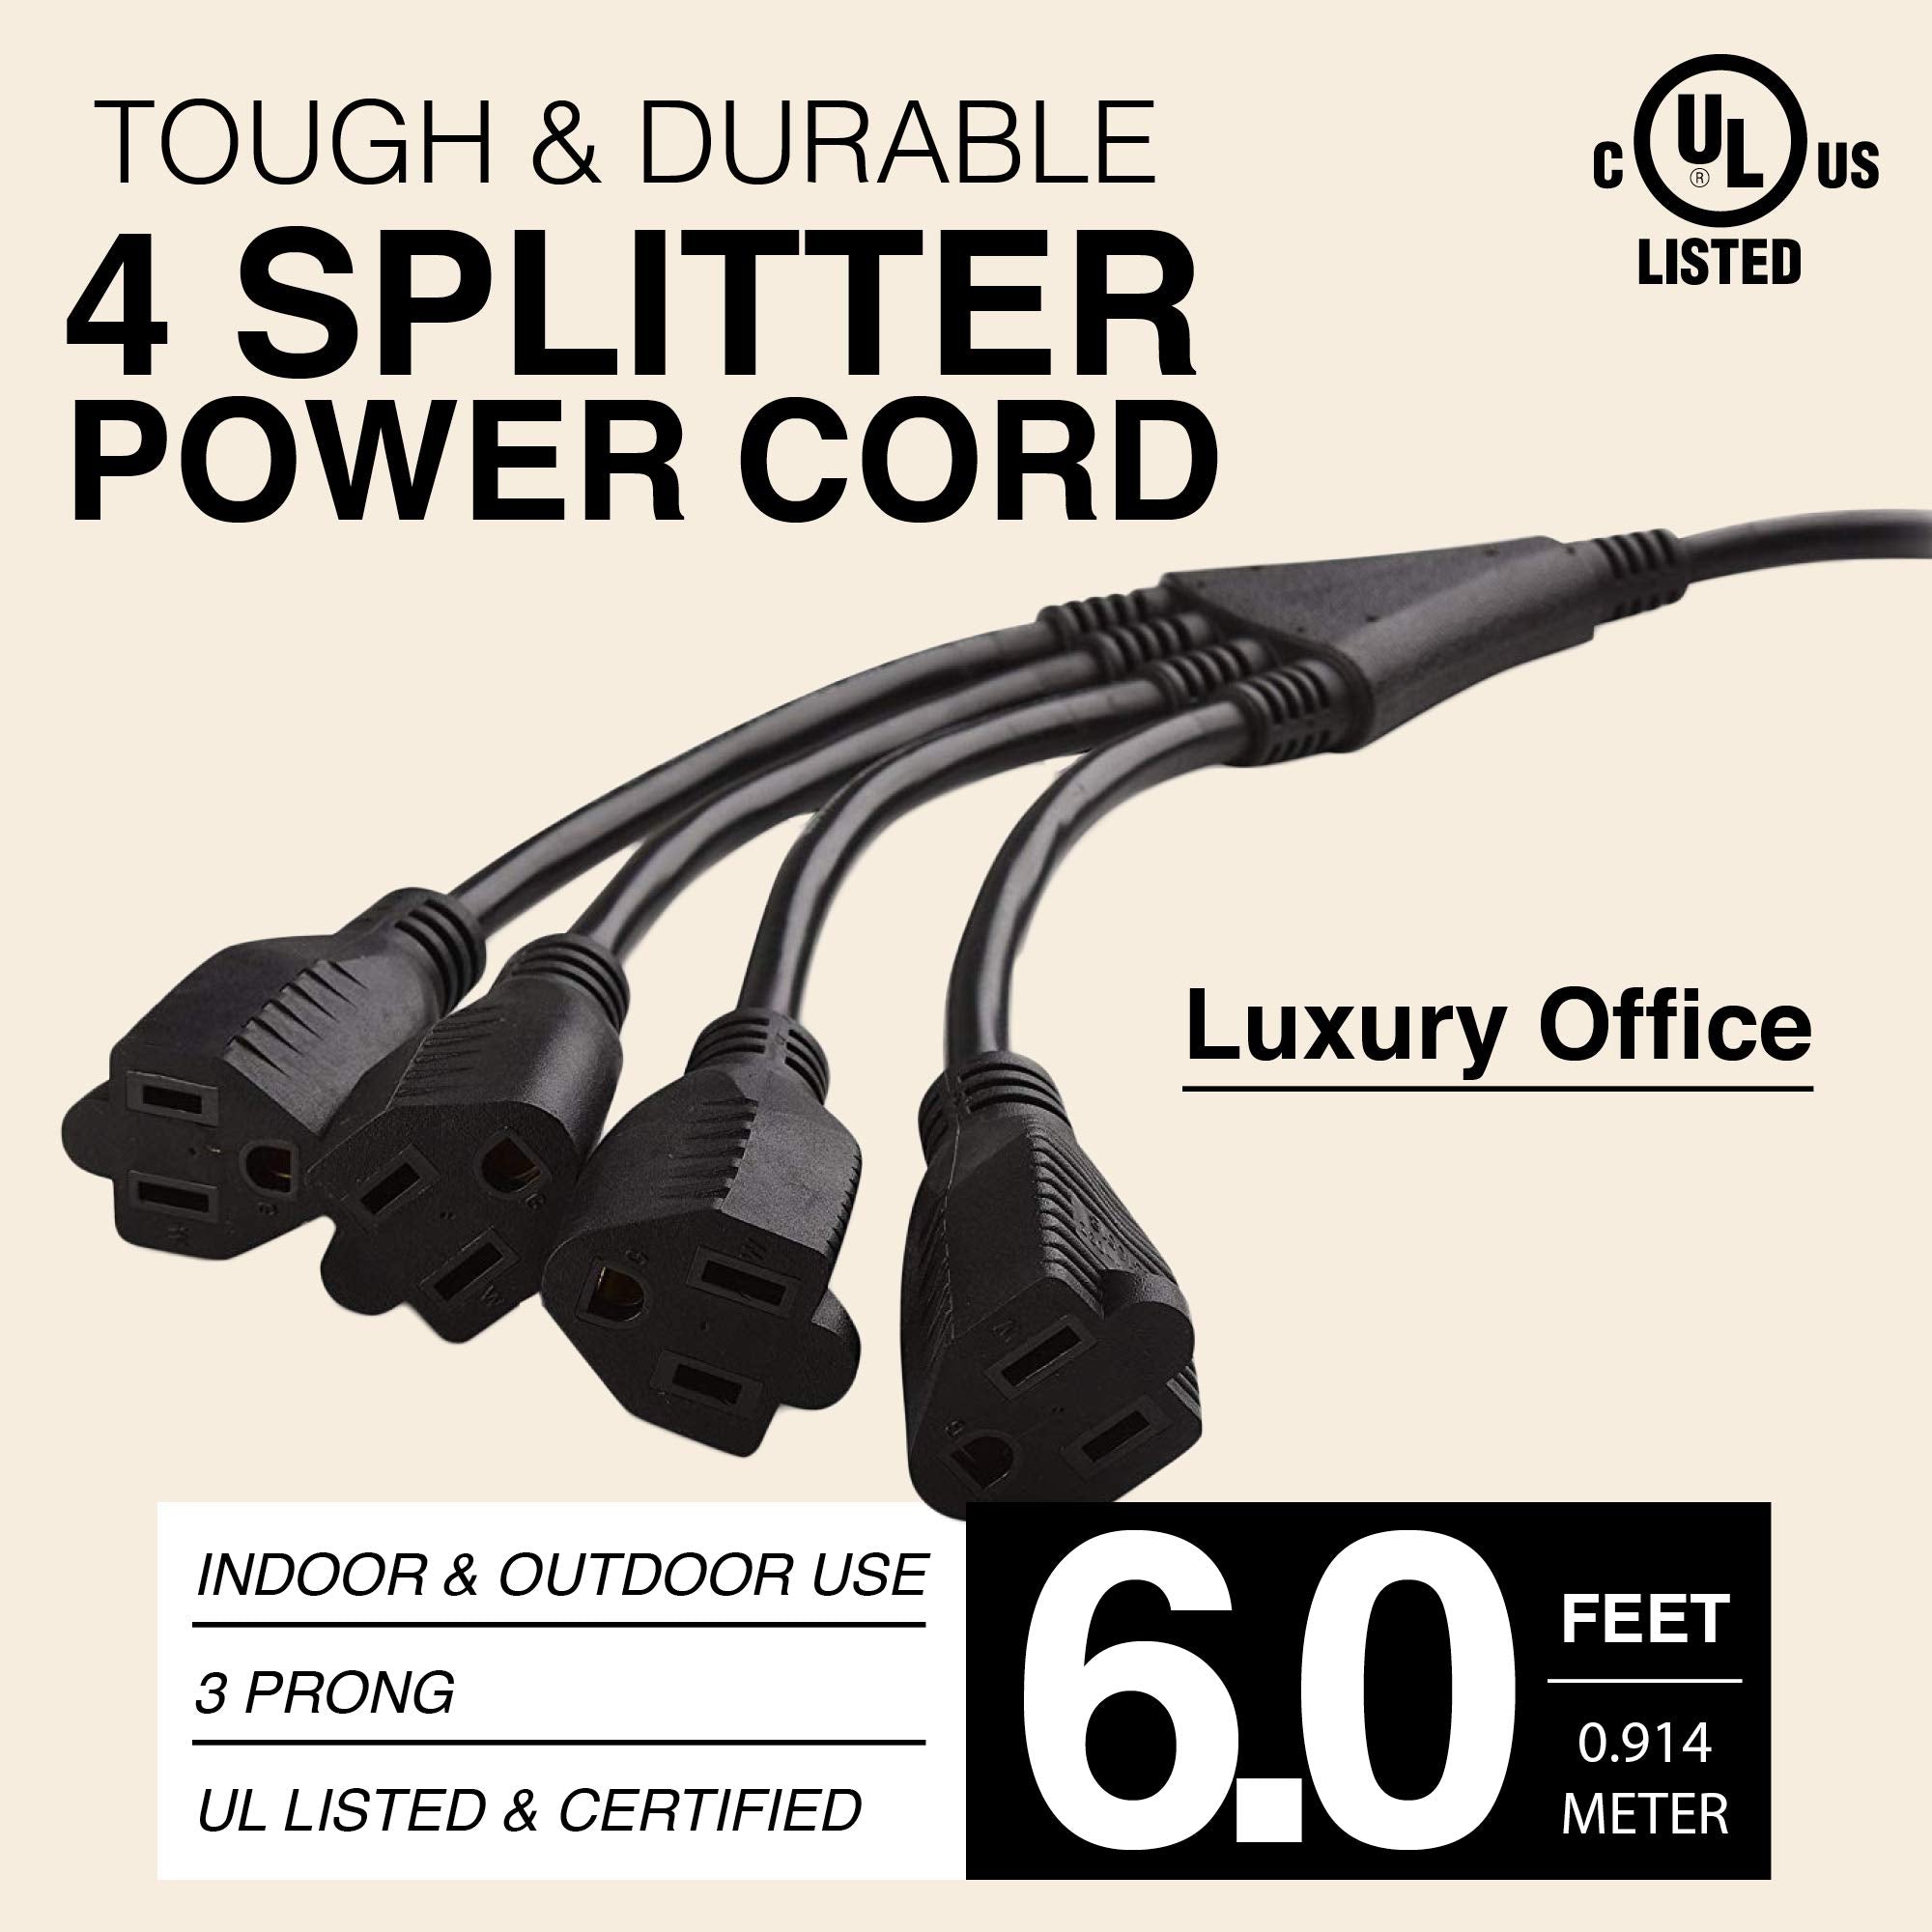 4 Way Power Splitter - 1 to 4 Extension Cord Splitter, 6' Long Extension Cord, Outlet Splitter 3 Prong, Power Strip Outlet Plug, Y Style Extension Cord, Black, SJT 16 AWG by Luxury Office  - Like New